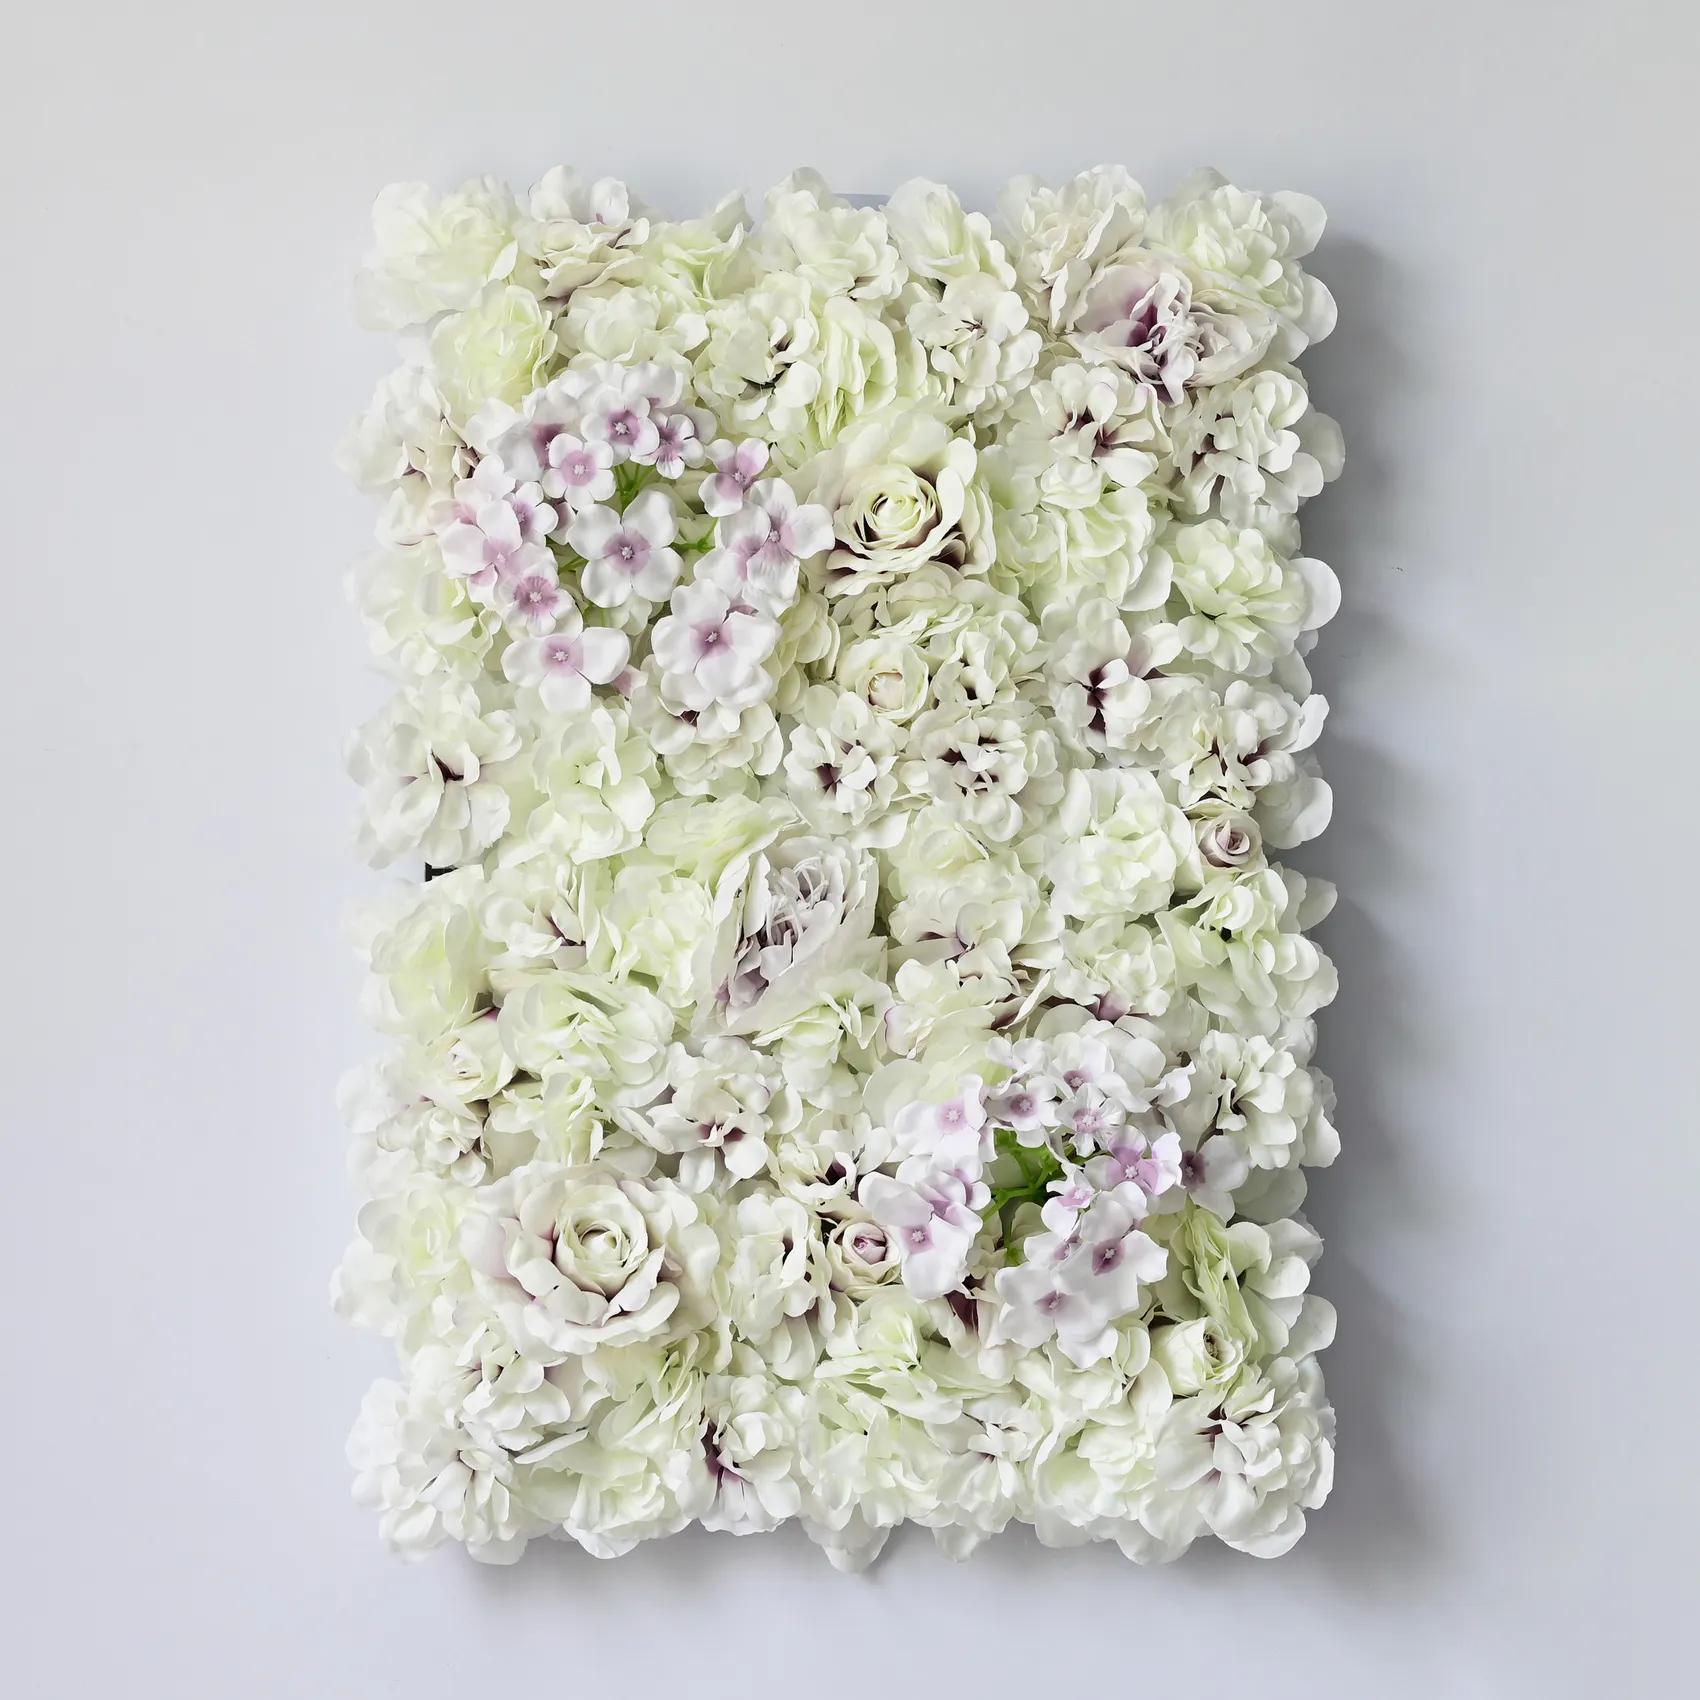 Artificial Flower Wall Home Party Decoration Decorative Silk Flower Panel Flowers For Decoration Wedding Artificial